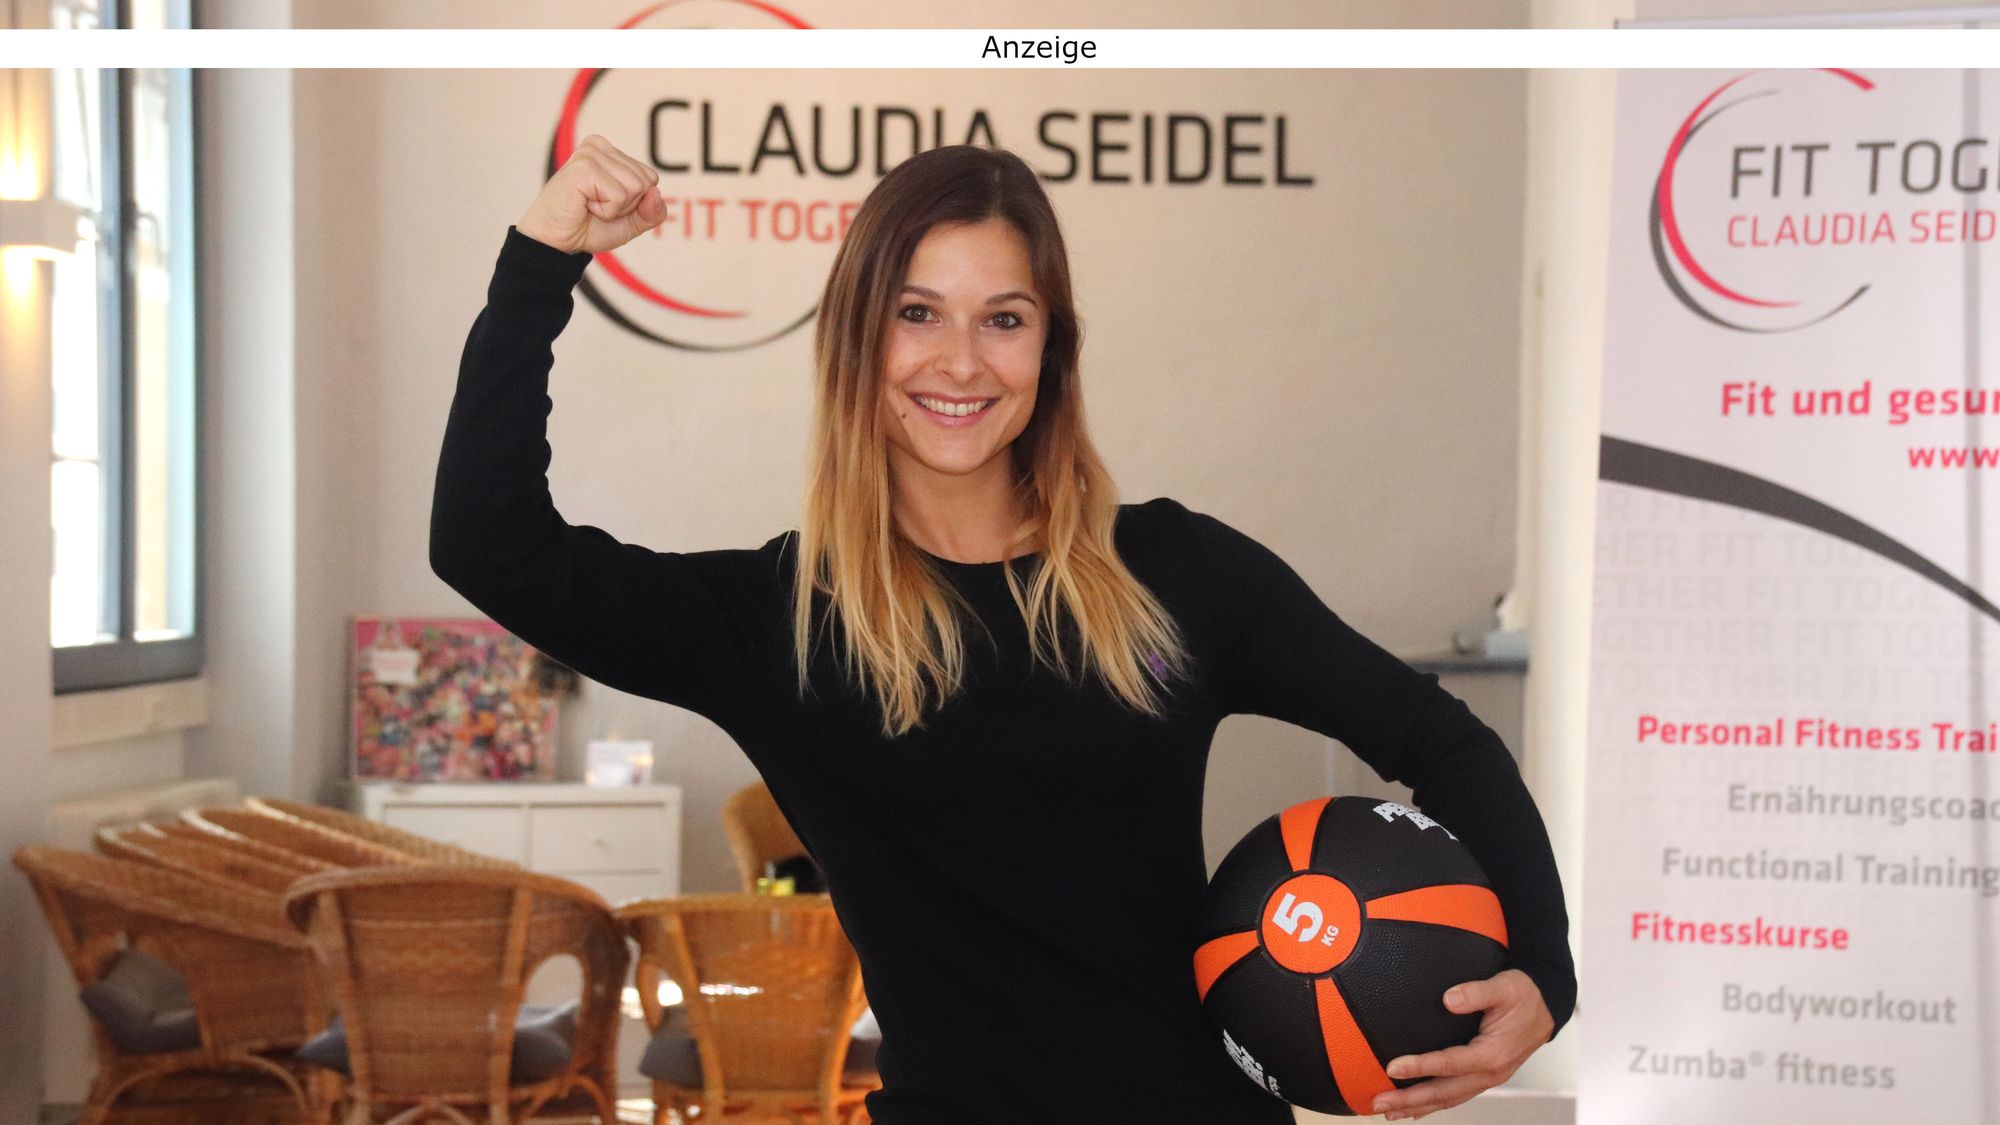 Macht andere fit: Claudia Seidel